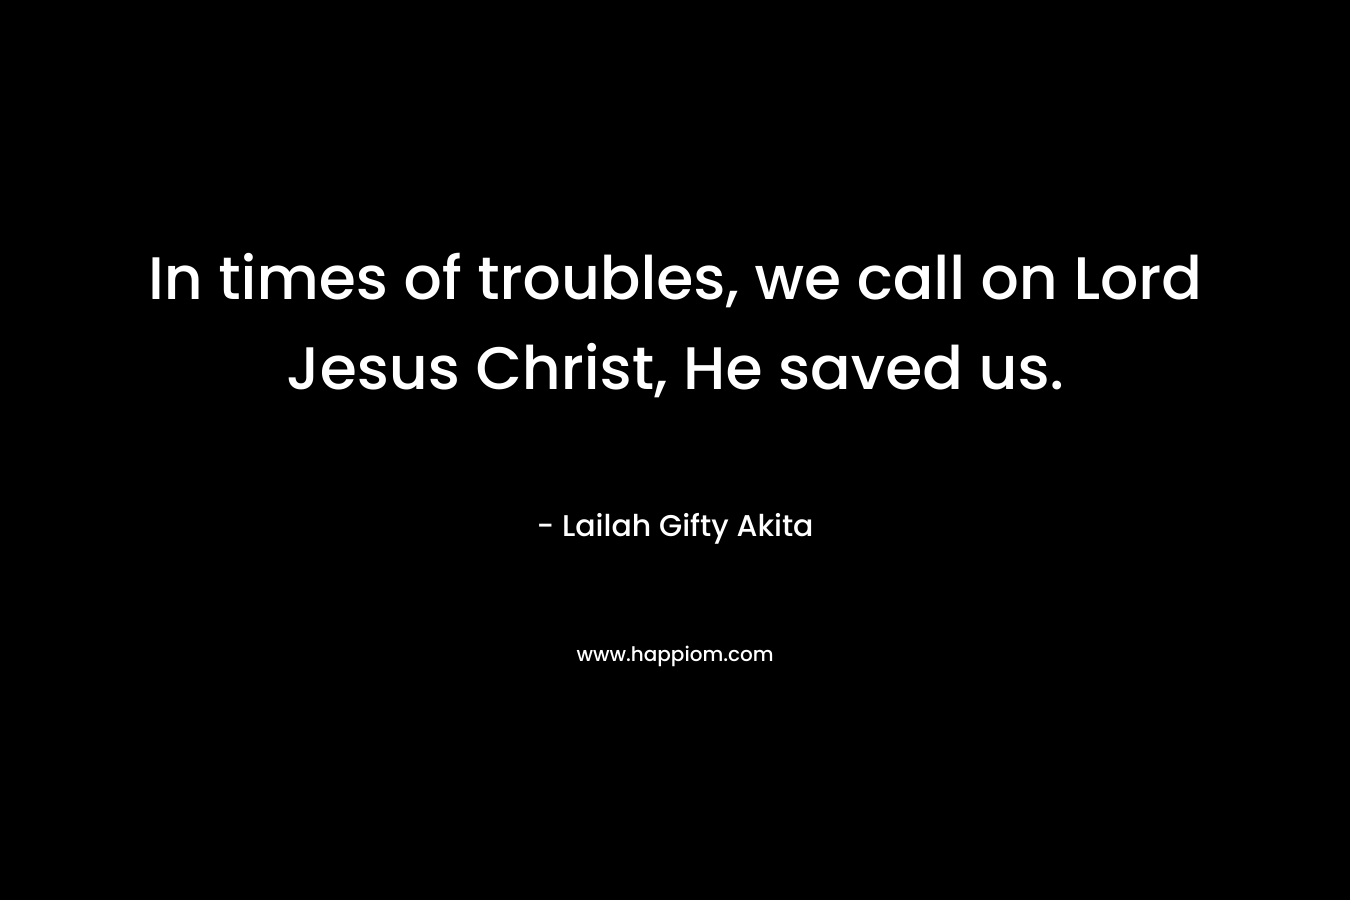 In times of troubles, we call on Lord Jesus Christ, He saved us.